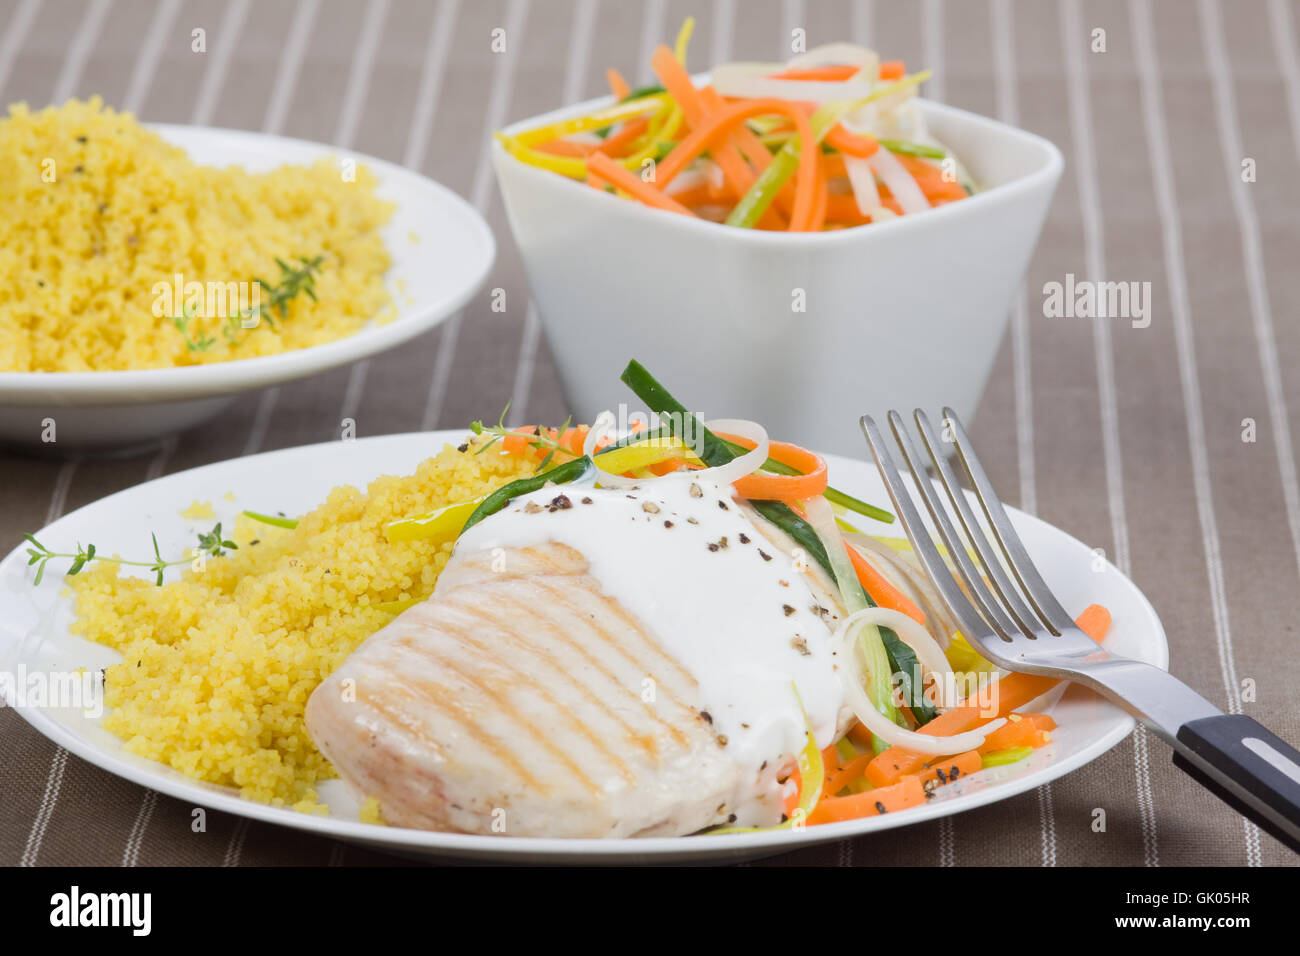 chicken vegetable dishes Stock Photo